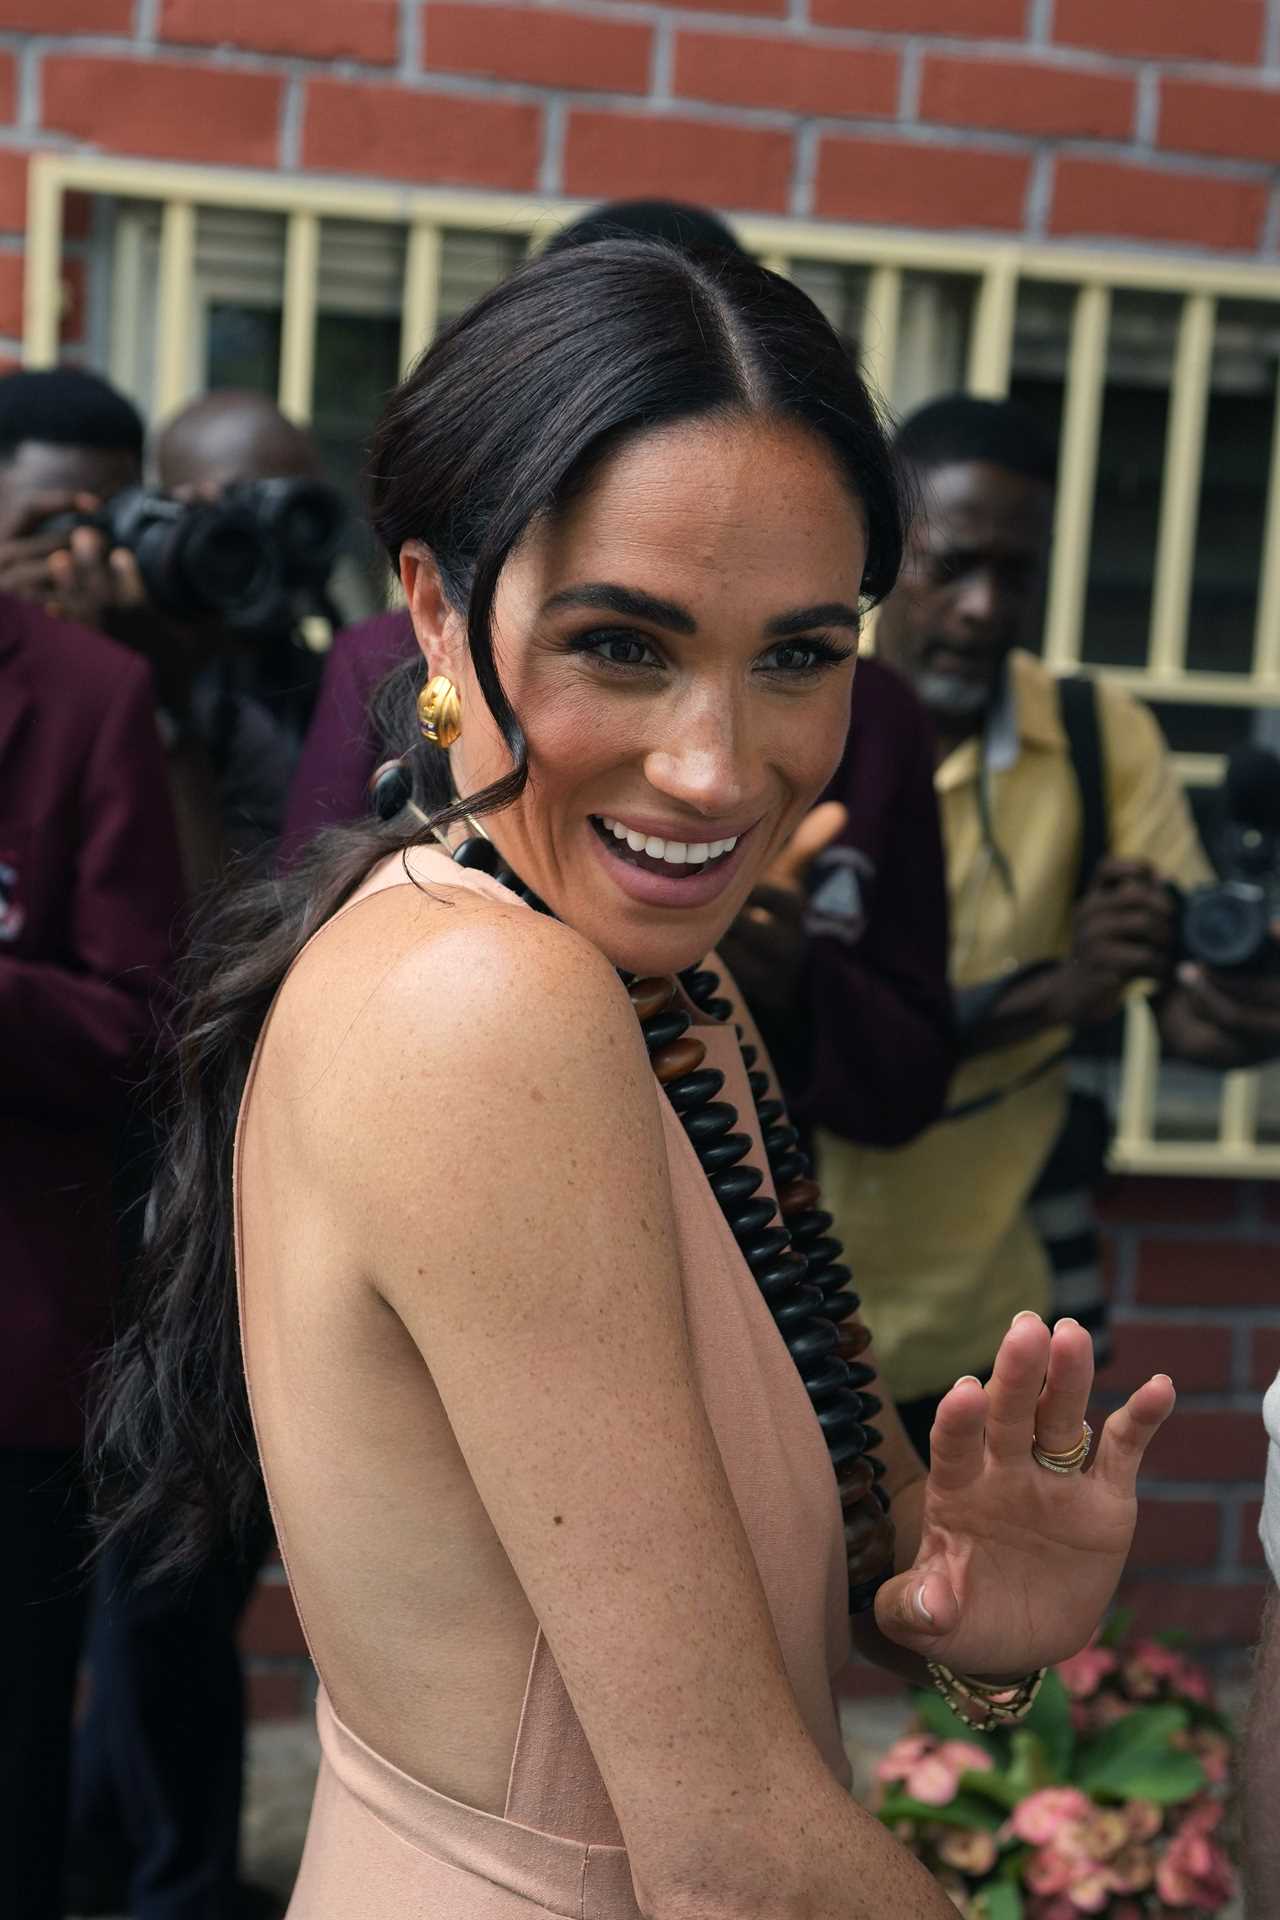 From Nigeria to the White House: Meghan Markle's Presidential Journey